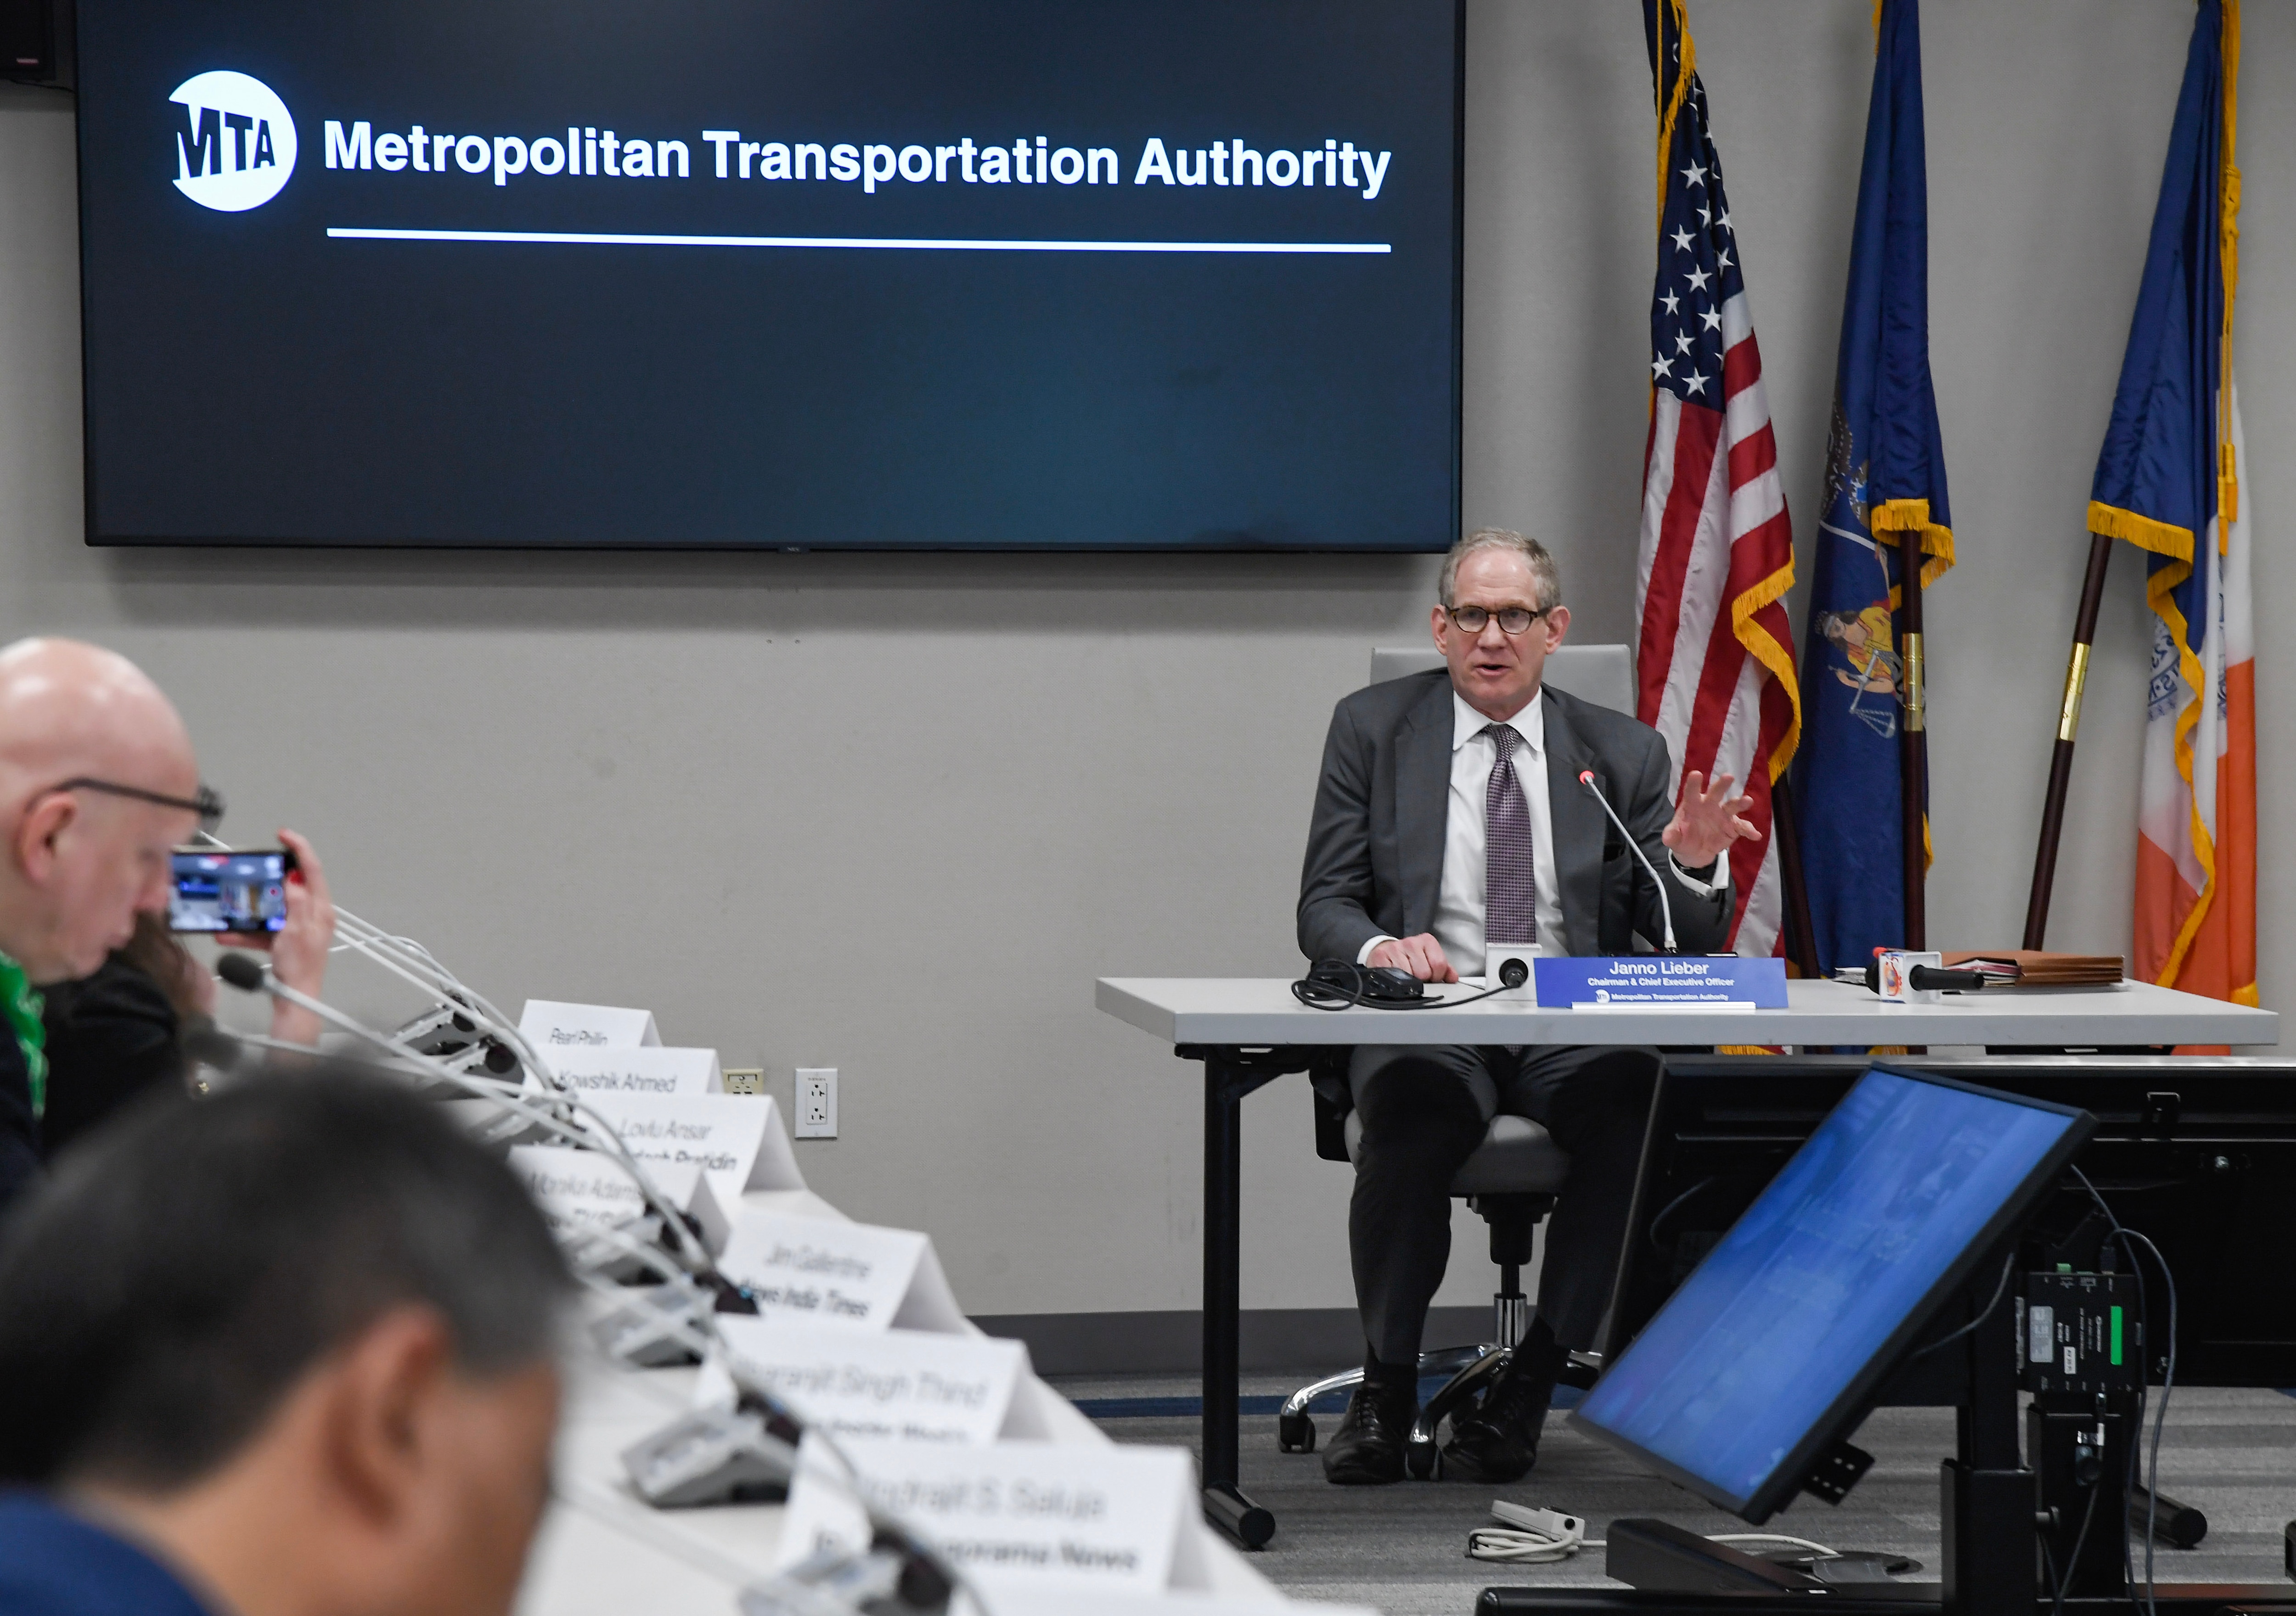 PHOTOS: MTA Chair and CEO Lieber Hosts Multicultural Media Roundtable